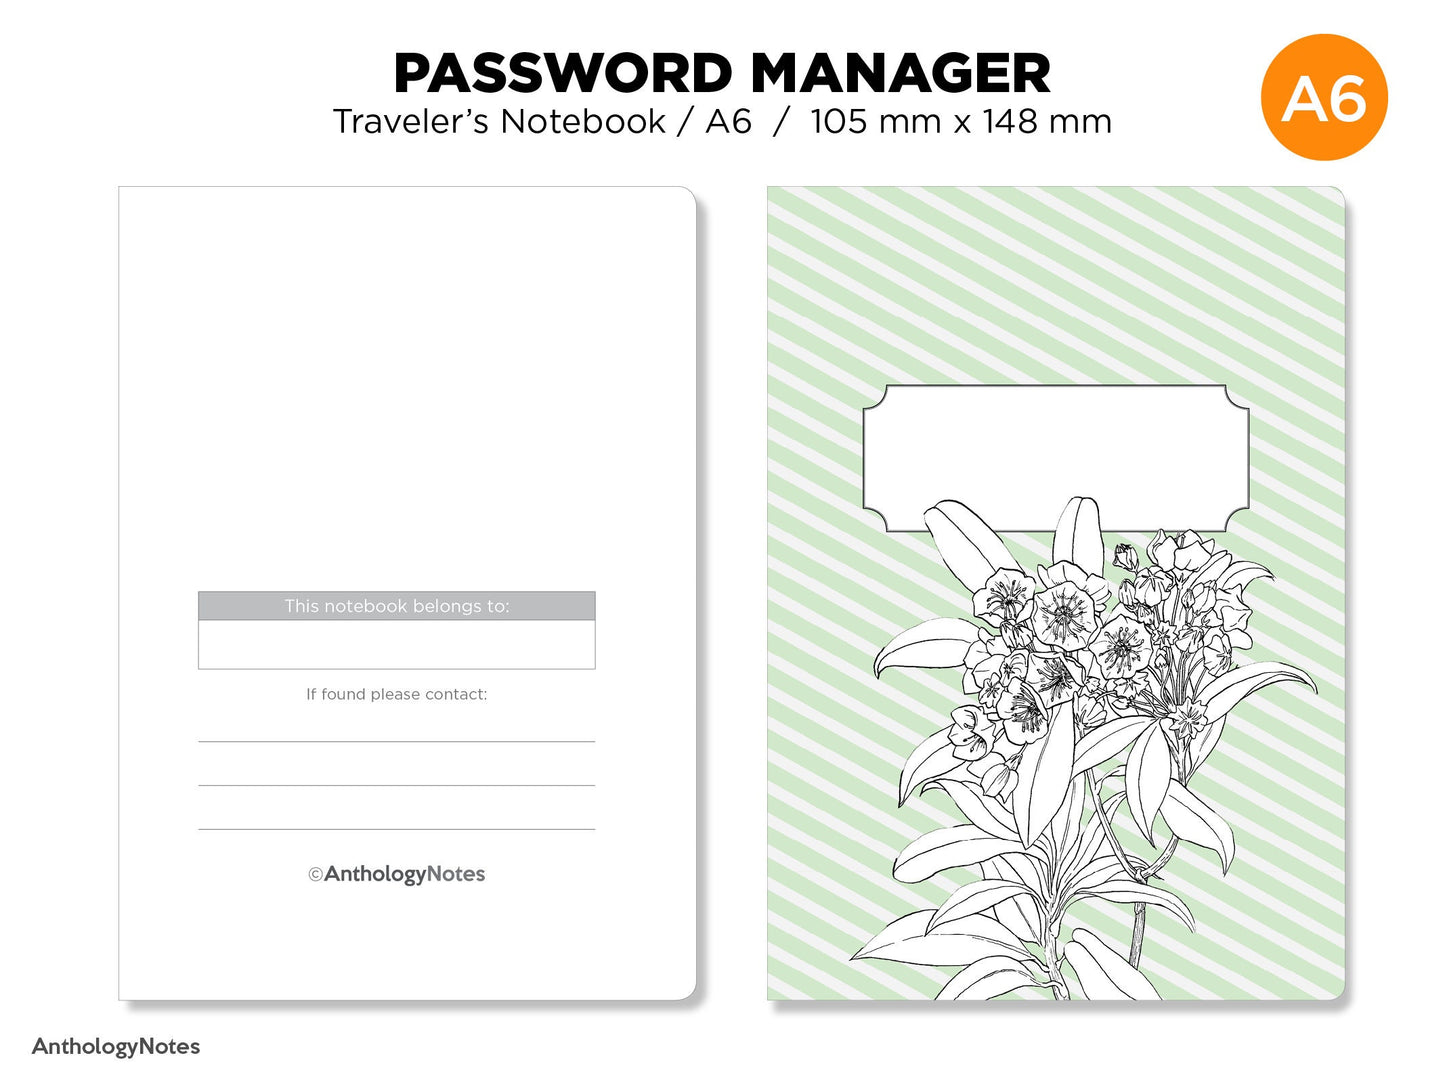 A6 PASSWORD Manager Traveler's Notebook Printable Insert GRID Functional Planning